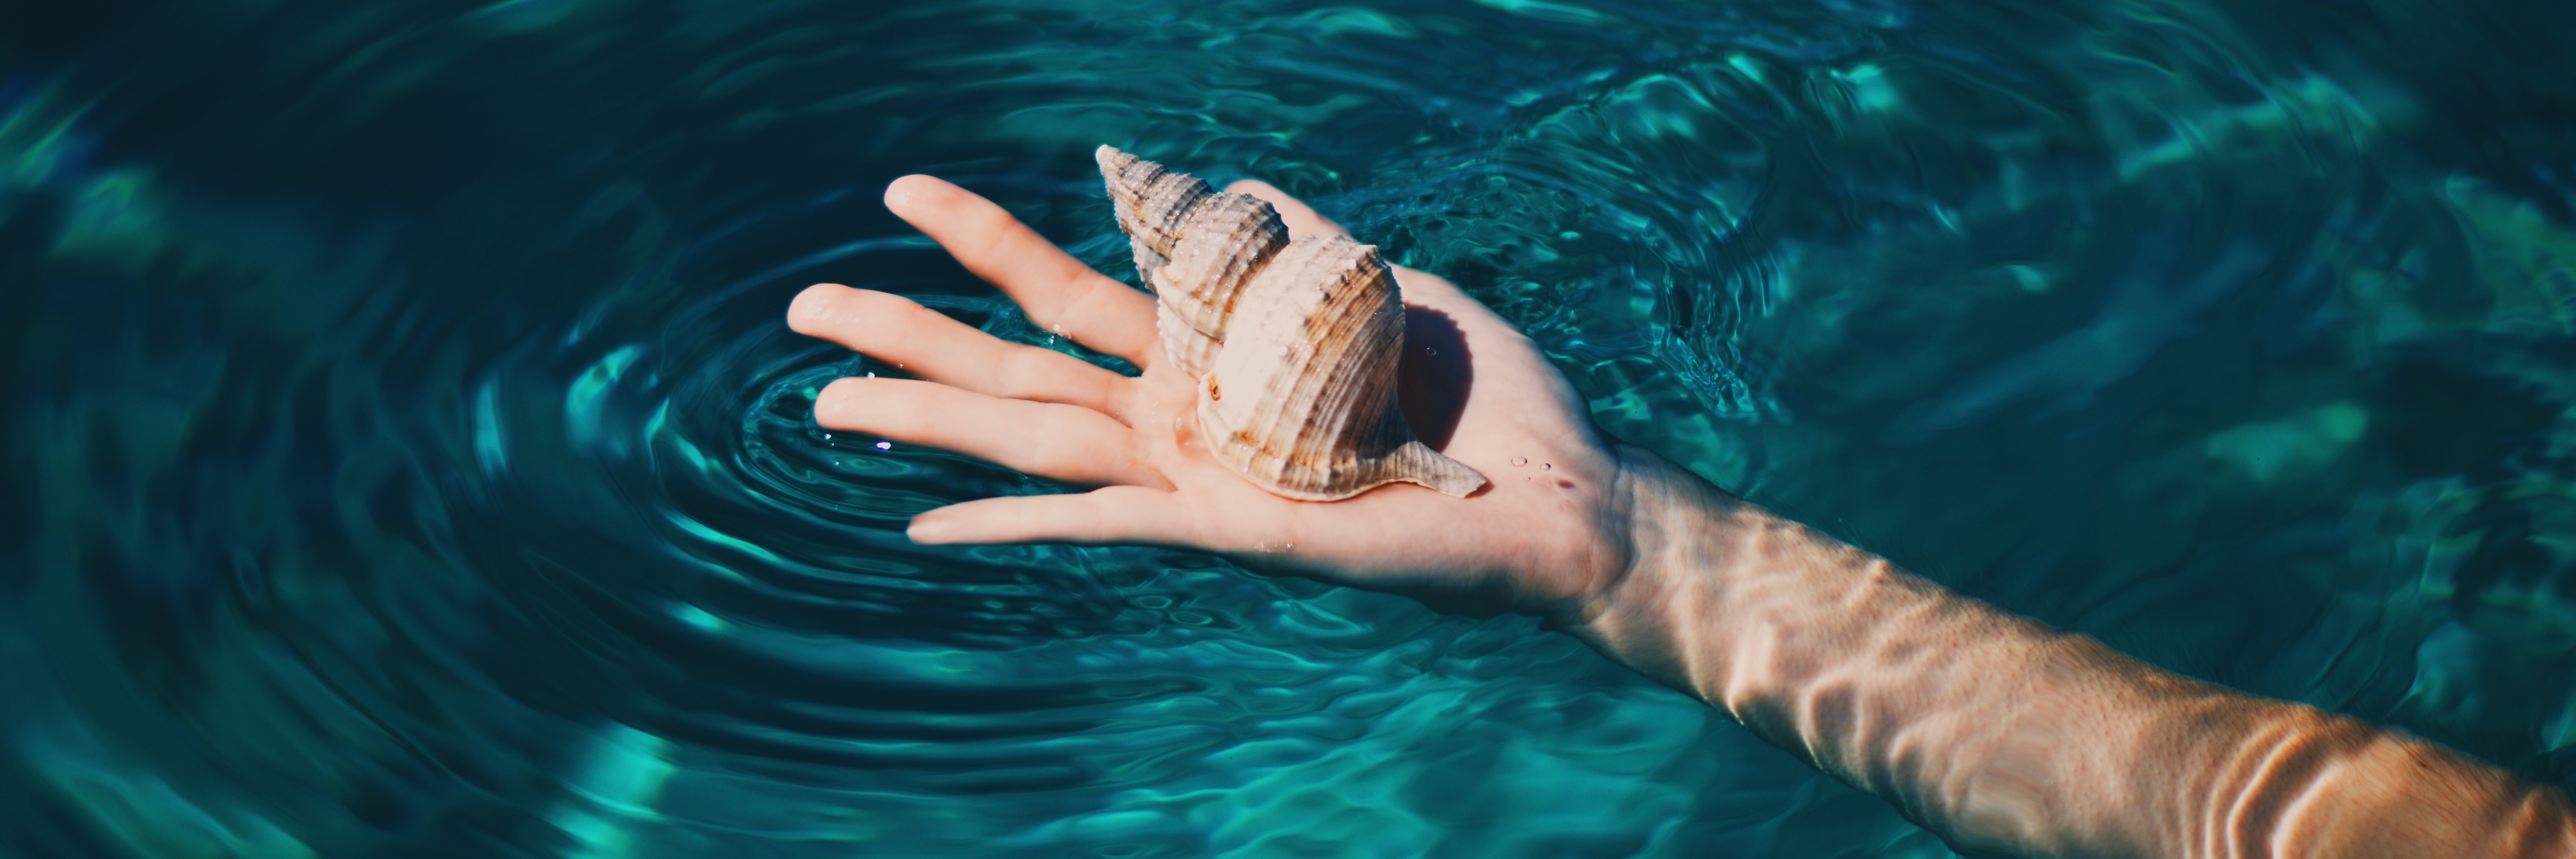 person's hand in clearwater holding shell concept for letting go